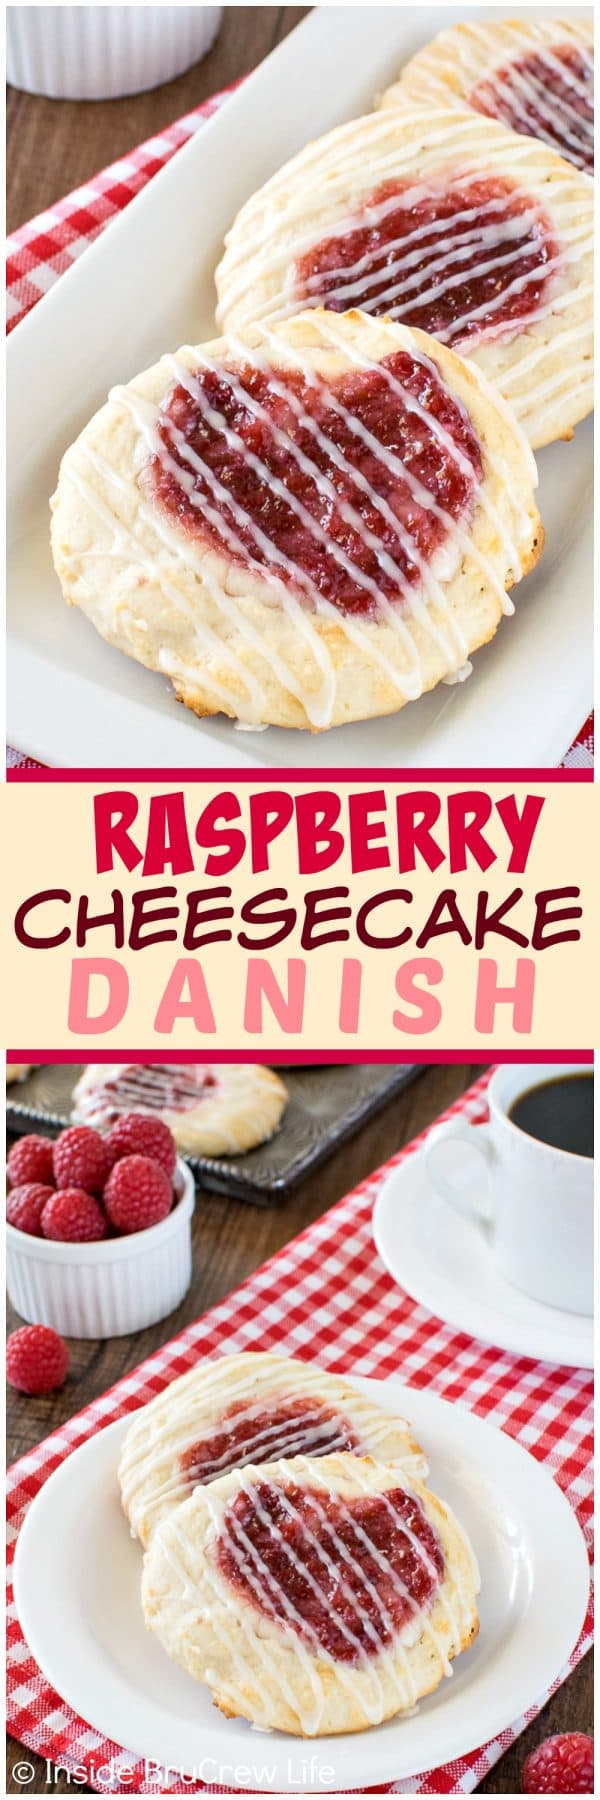 Raspberry Cheesecake Danish - a sweet cheesecake and raspberry preserve center makes this easy homemade pastry recipe a great breakfast or after school snack. 